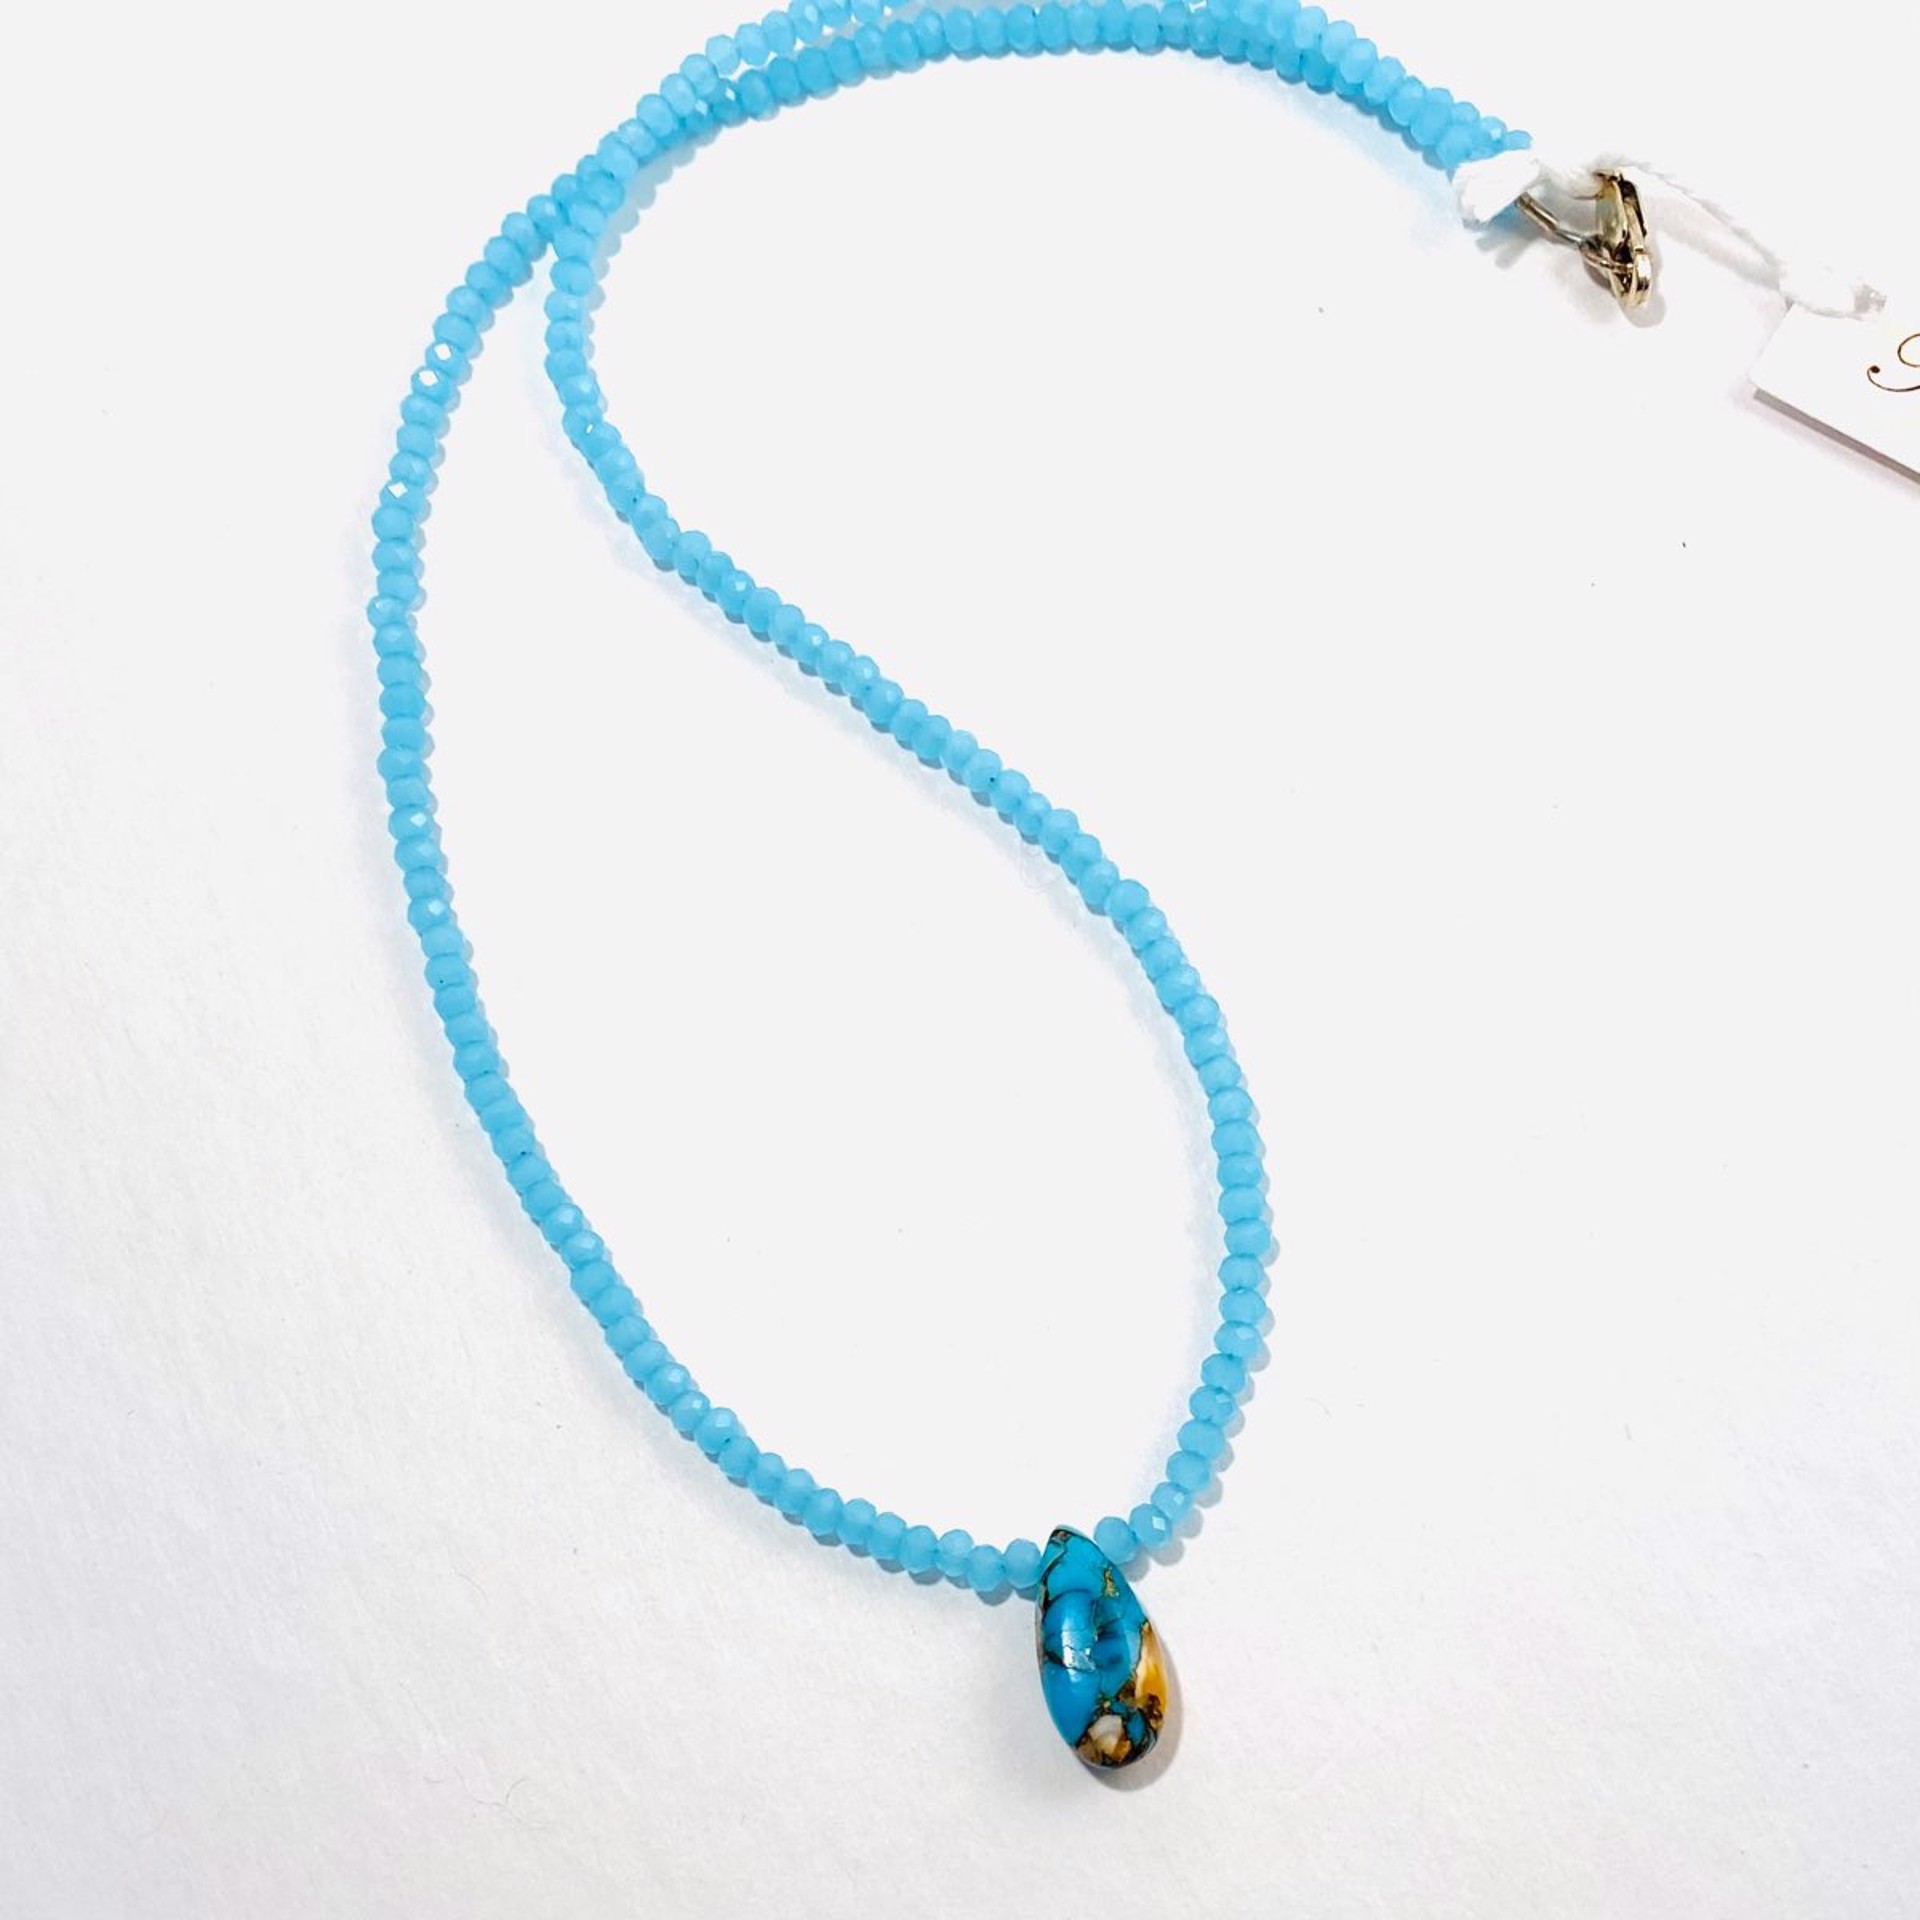 NT22-212 Small Faceted Blue Jade Turquoise  Necklace by Nance Trueworthy